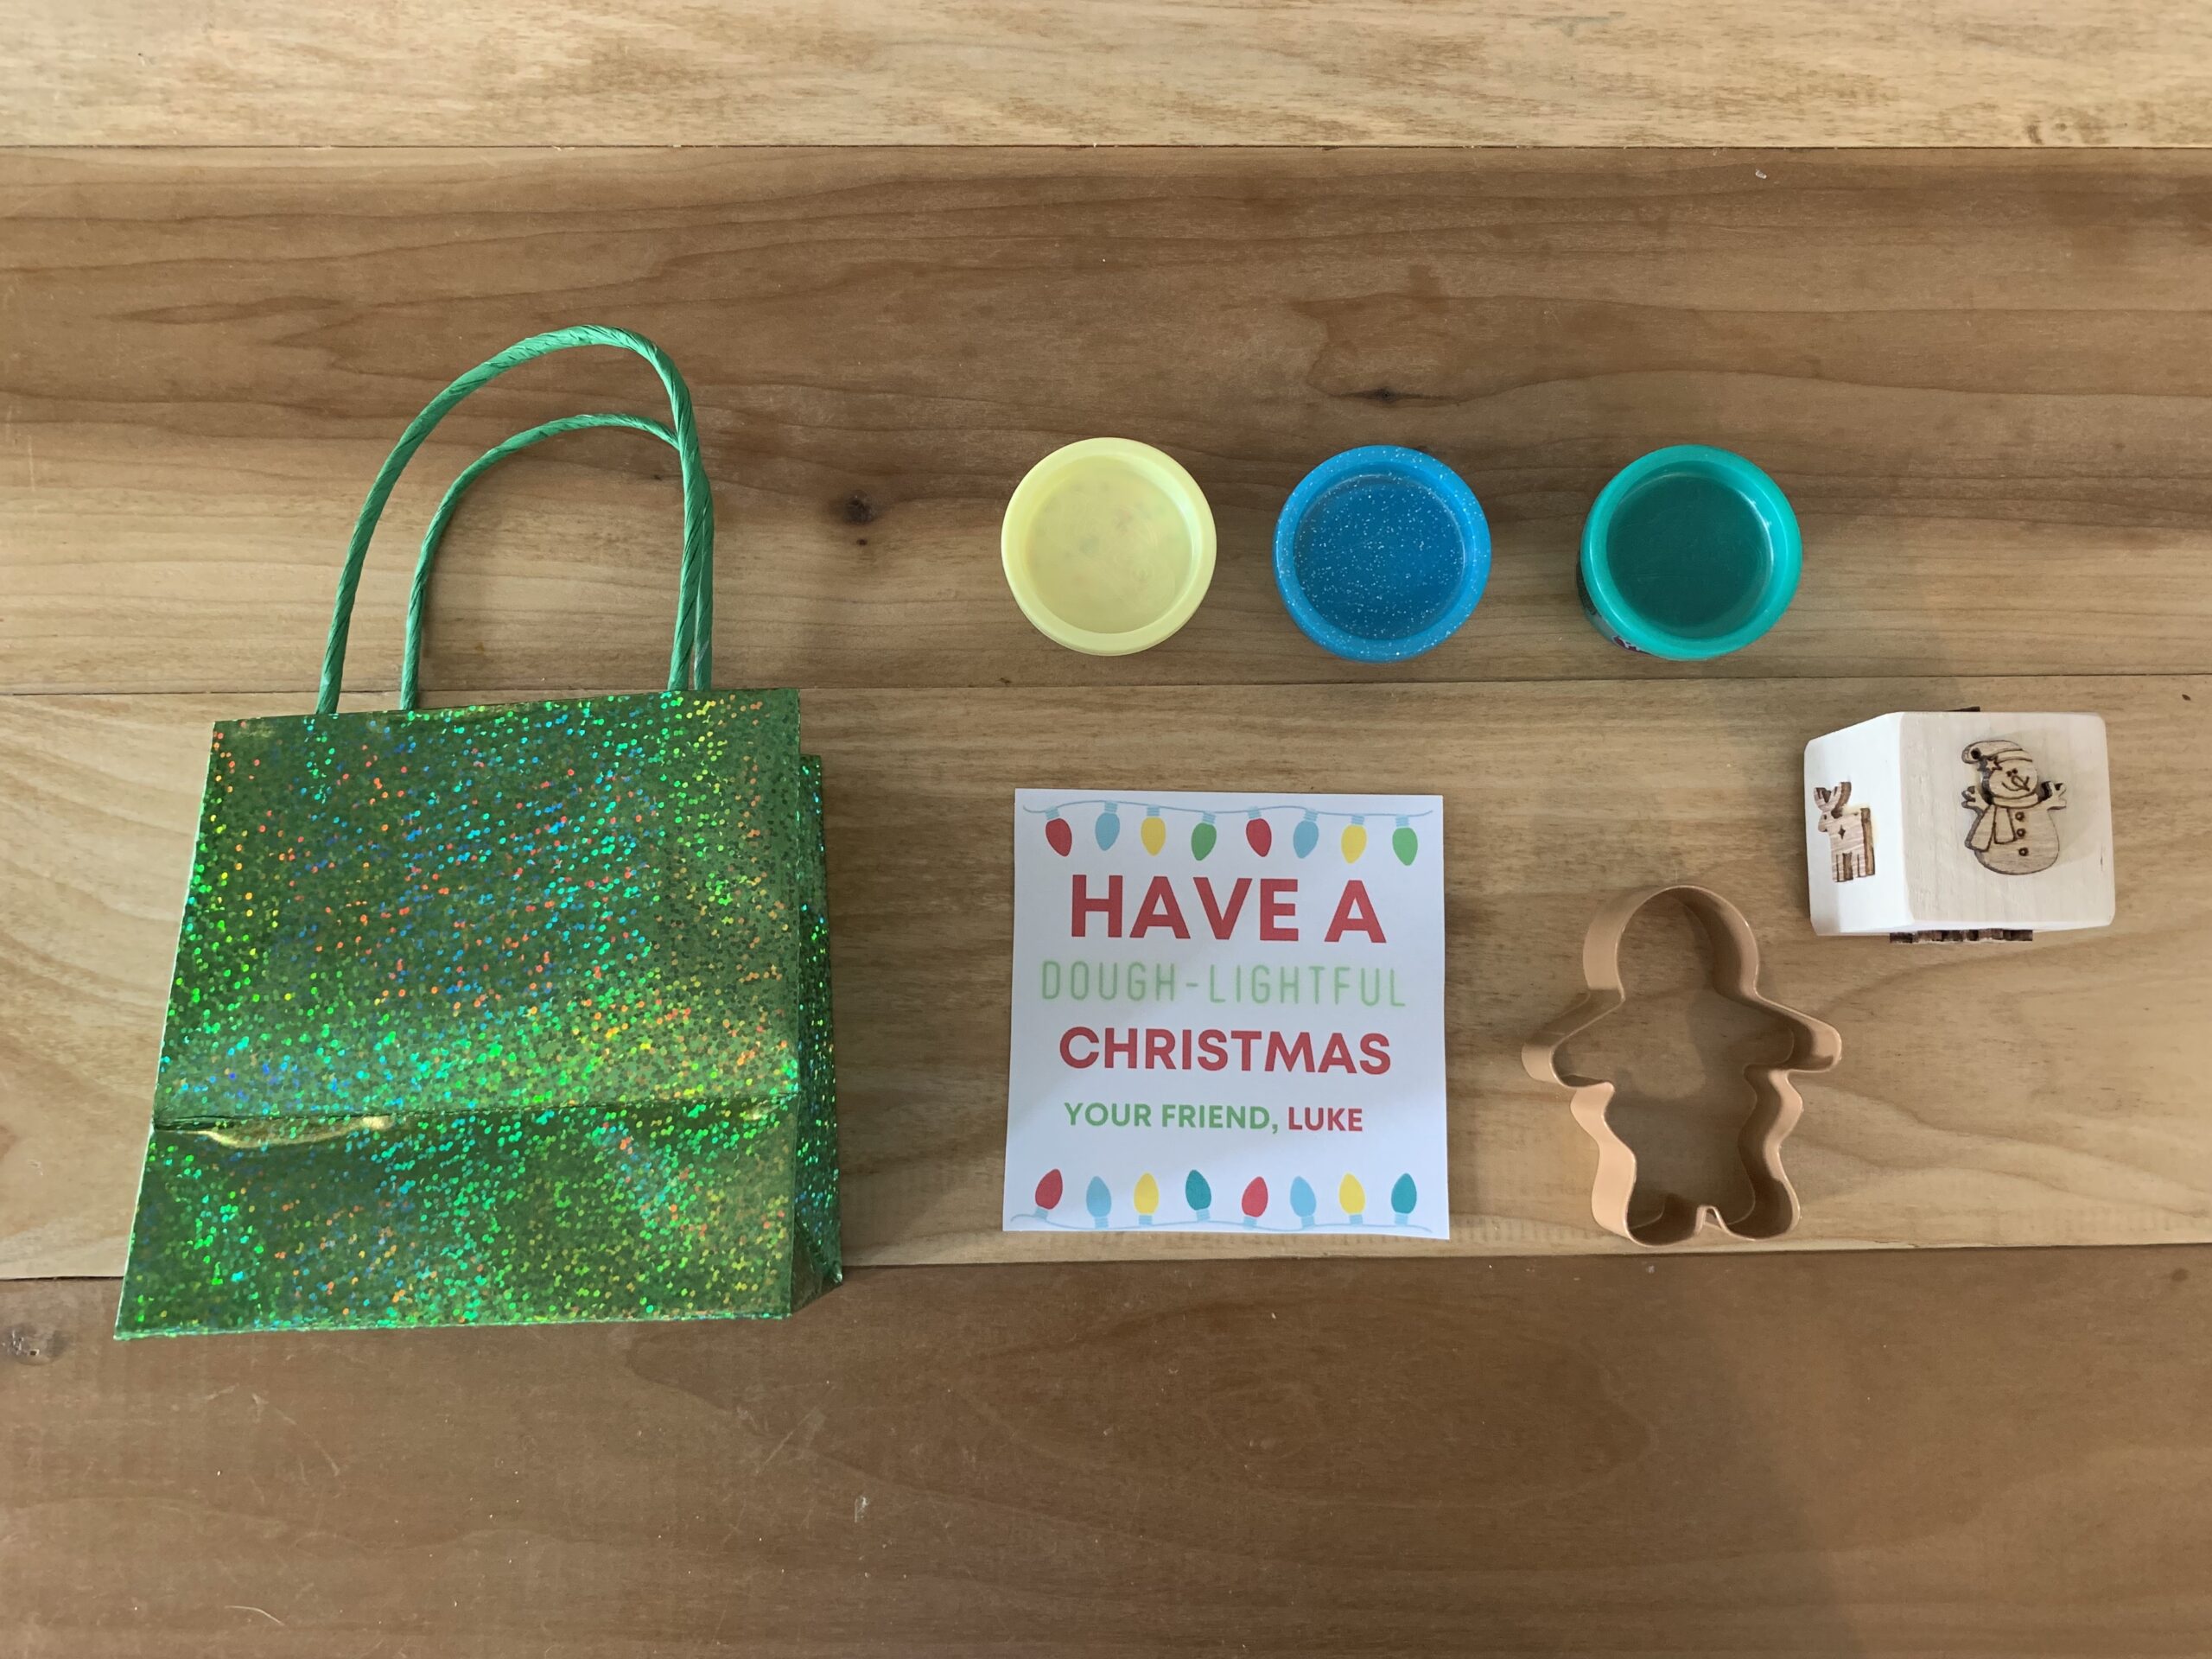 play-doh-class-christmas-gift-tag-free-printable-celebrating-with-kids